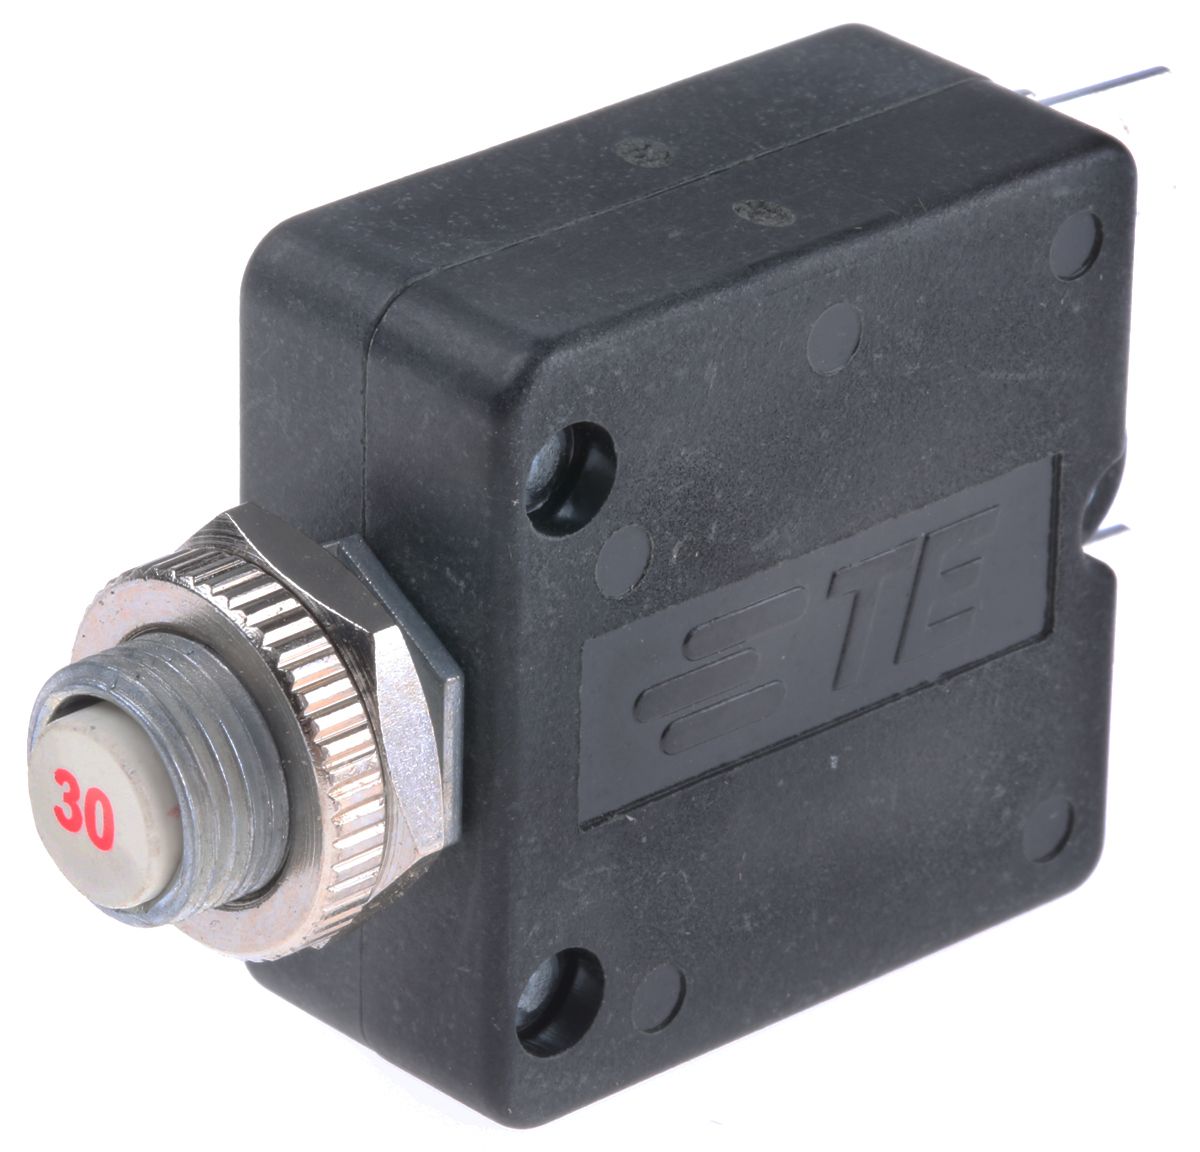 TE Connectivity W58 Single Pole Thermal Circuit Breaker - 50 V dc, 250V ac Voltage Rating, 30A Current Rating